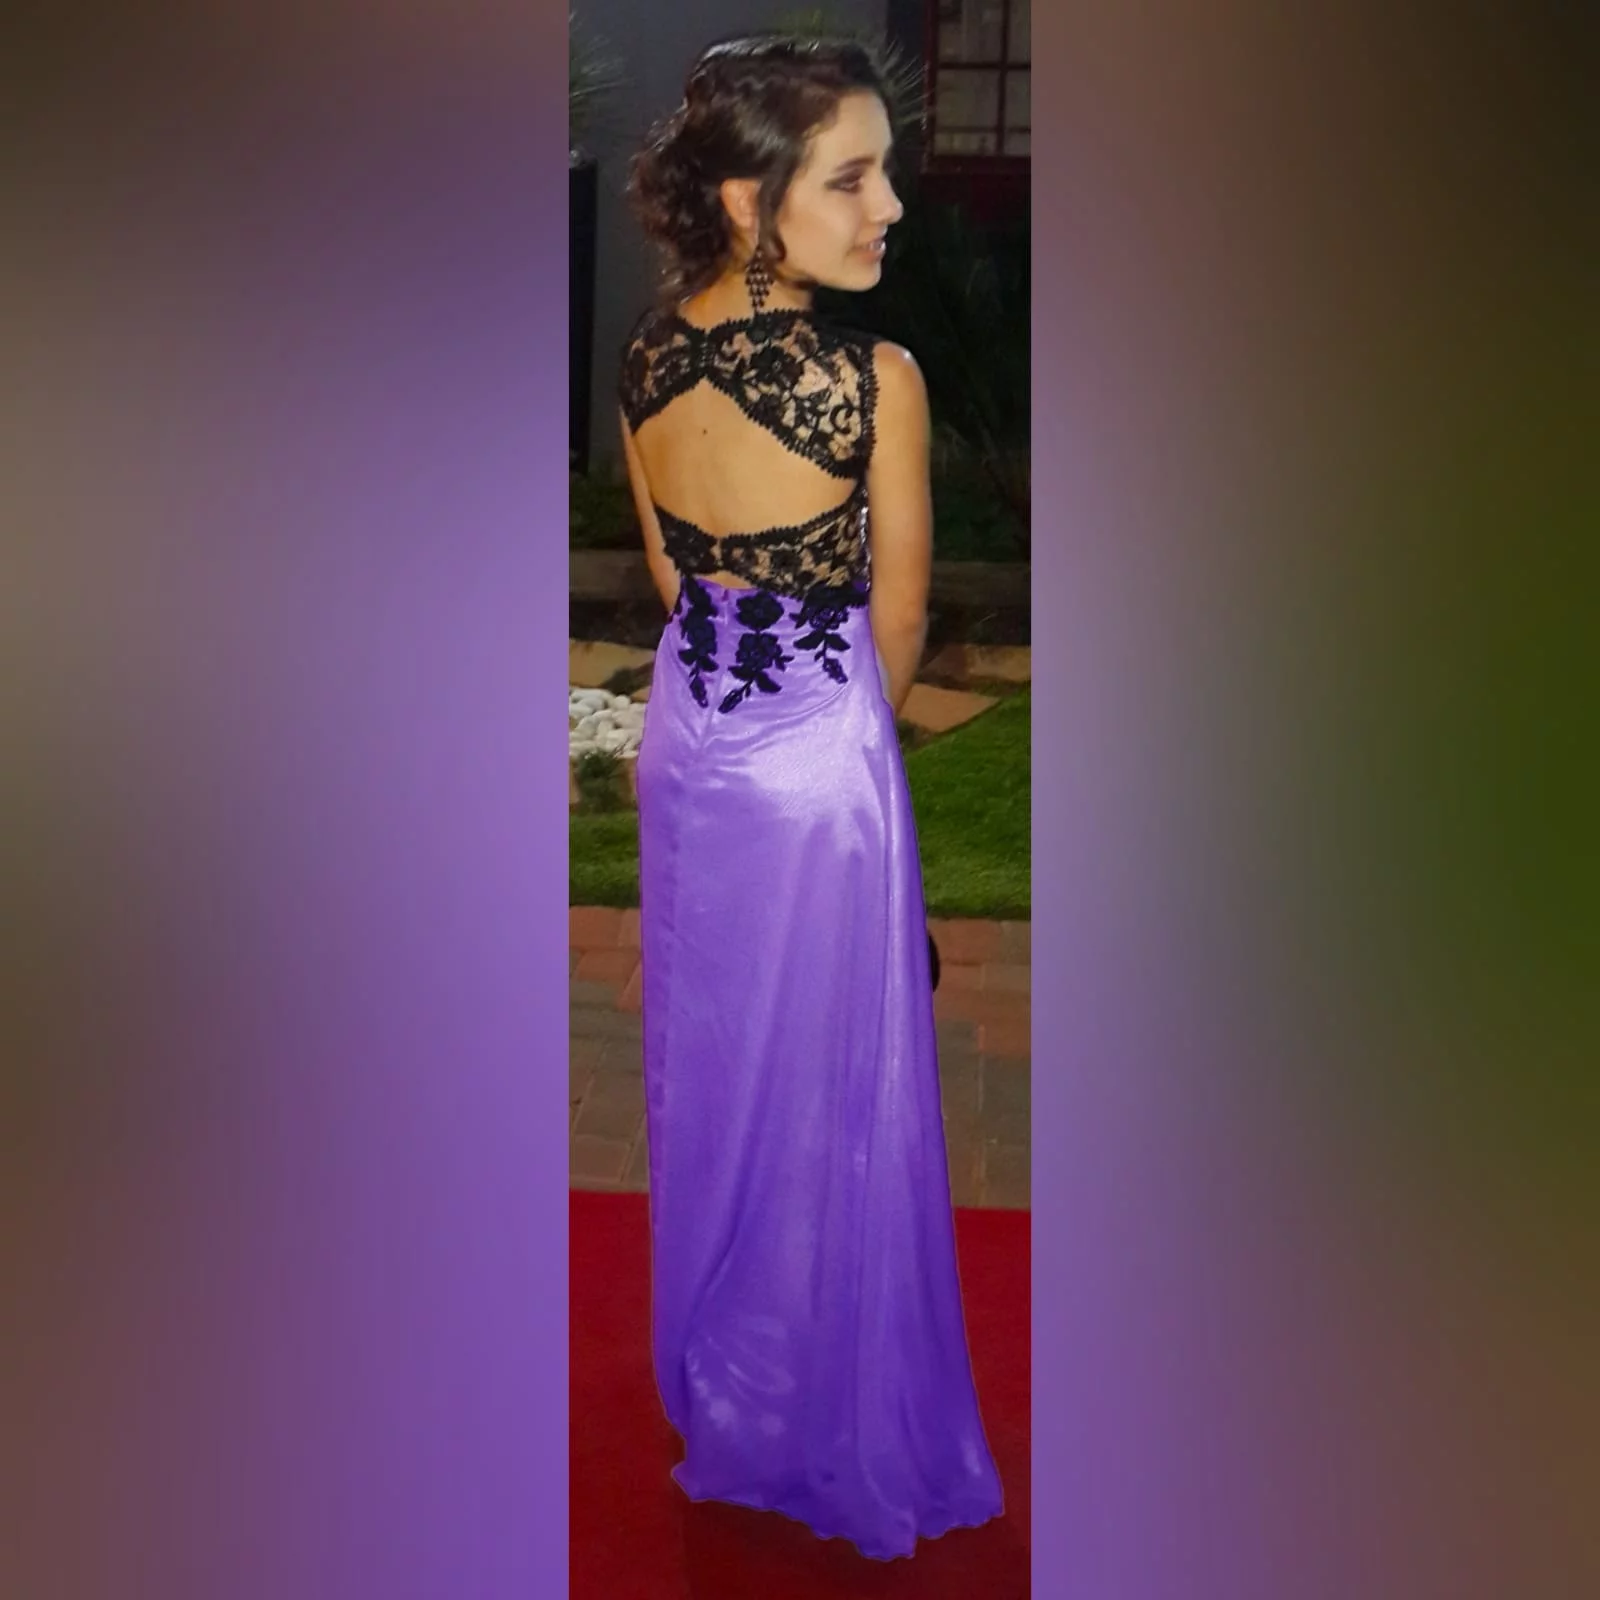 Lilac and black lace matric farewell dress 7 lilac and black lace matric farewell dress. Bodice with applique lace and a sweetheart neckline. With sheer lace shoulder straps and sheer lace on the back. Long and flowy matric farewell dress.